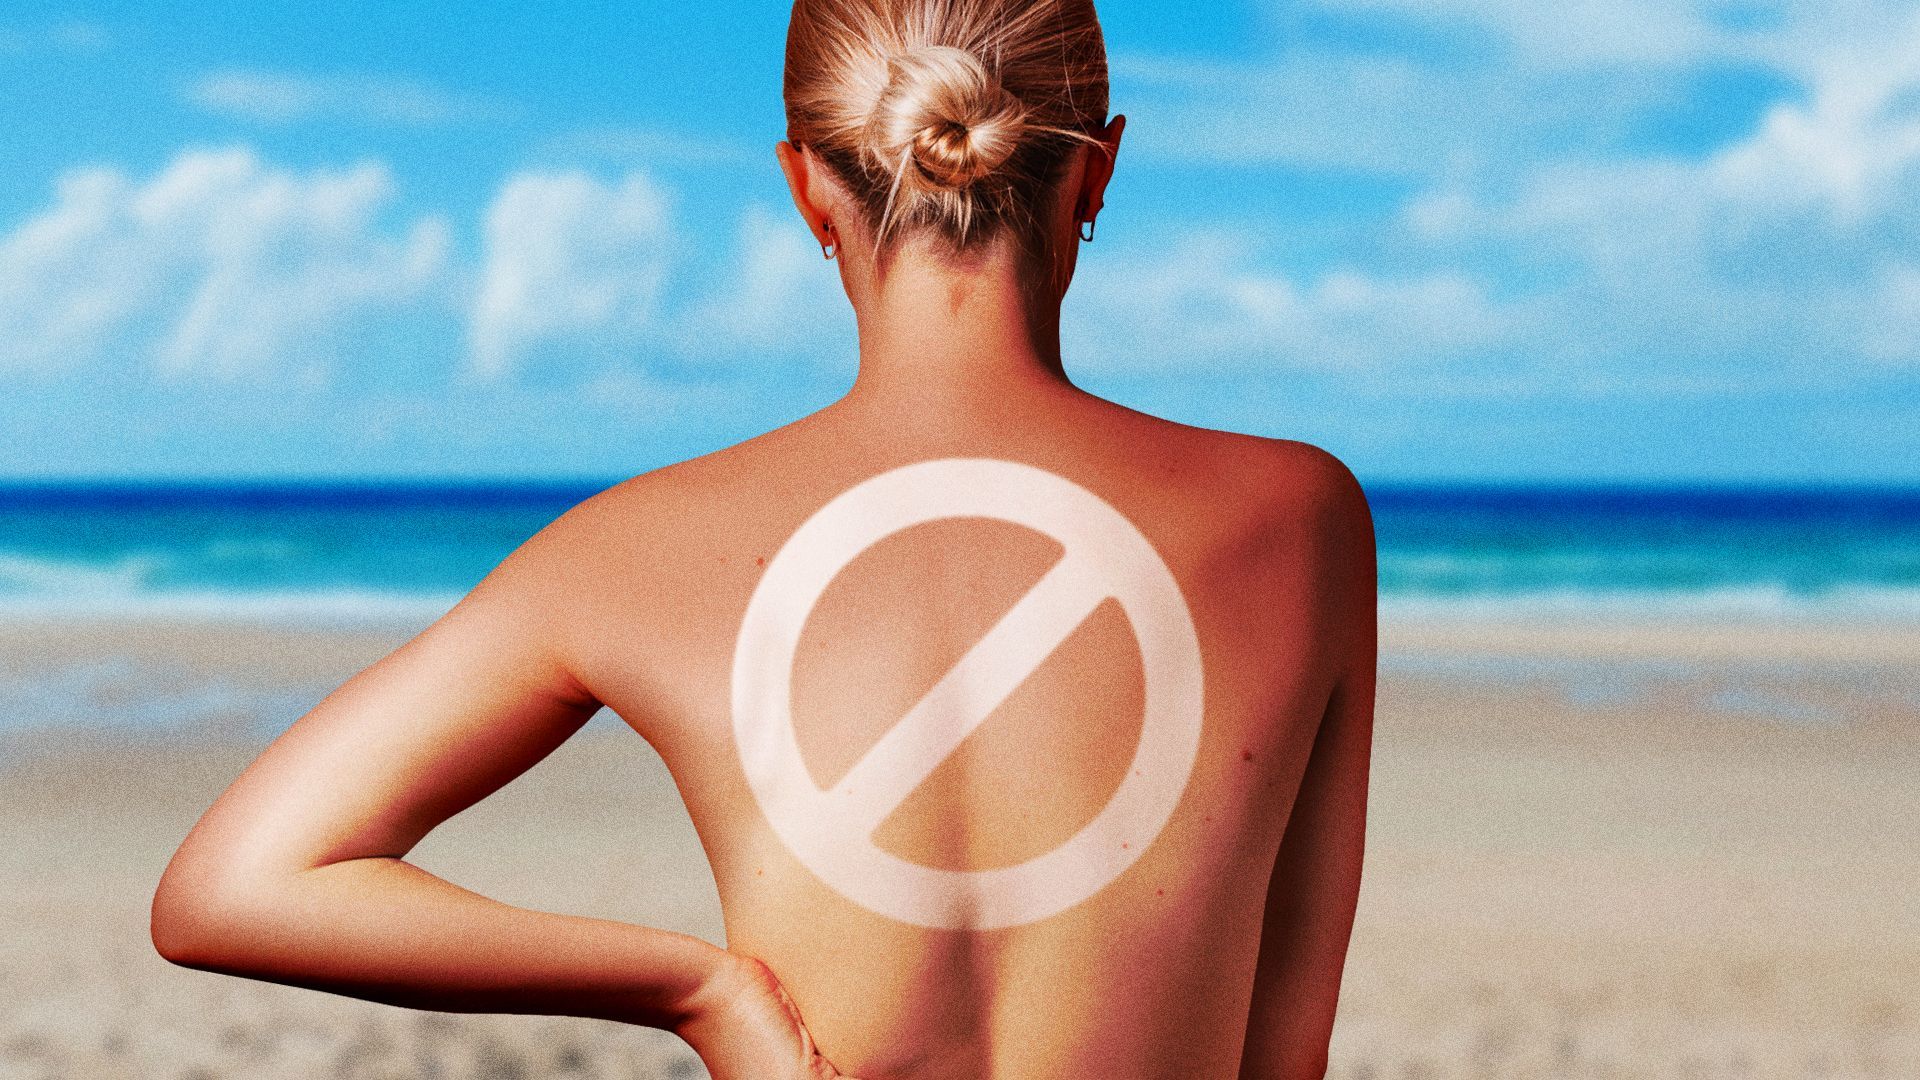 Illustration of a no-symbol being formed from tan lines on a woman's back at the beach. 